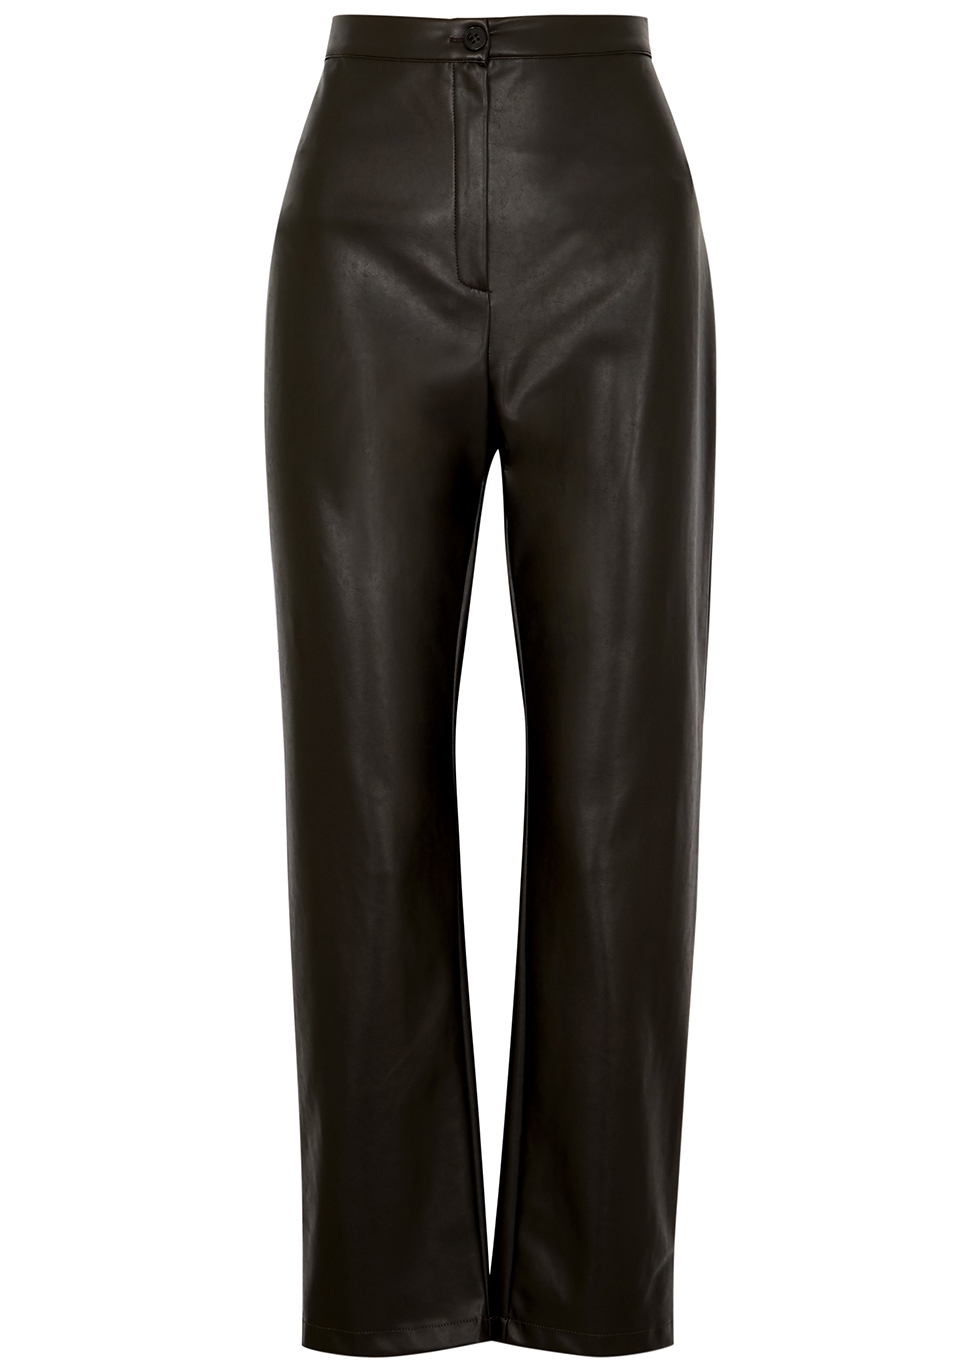 Reims brown faux leather trousers